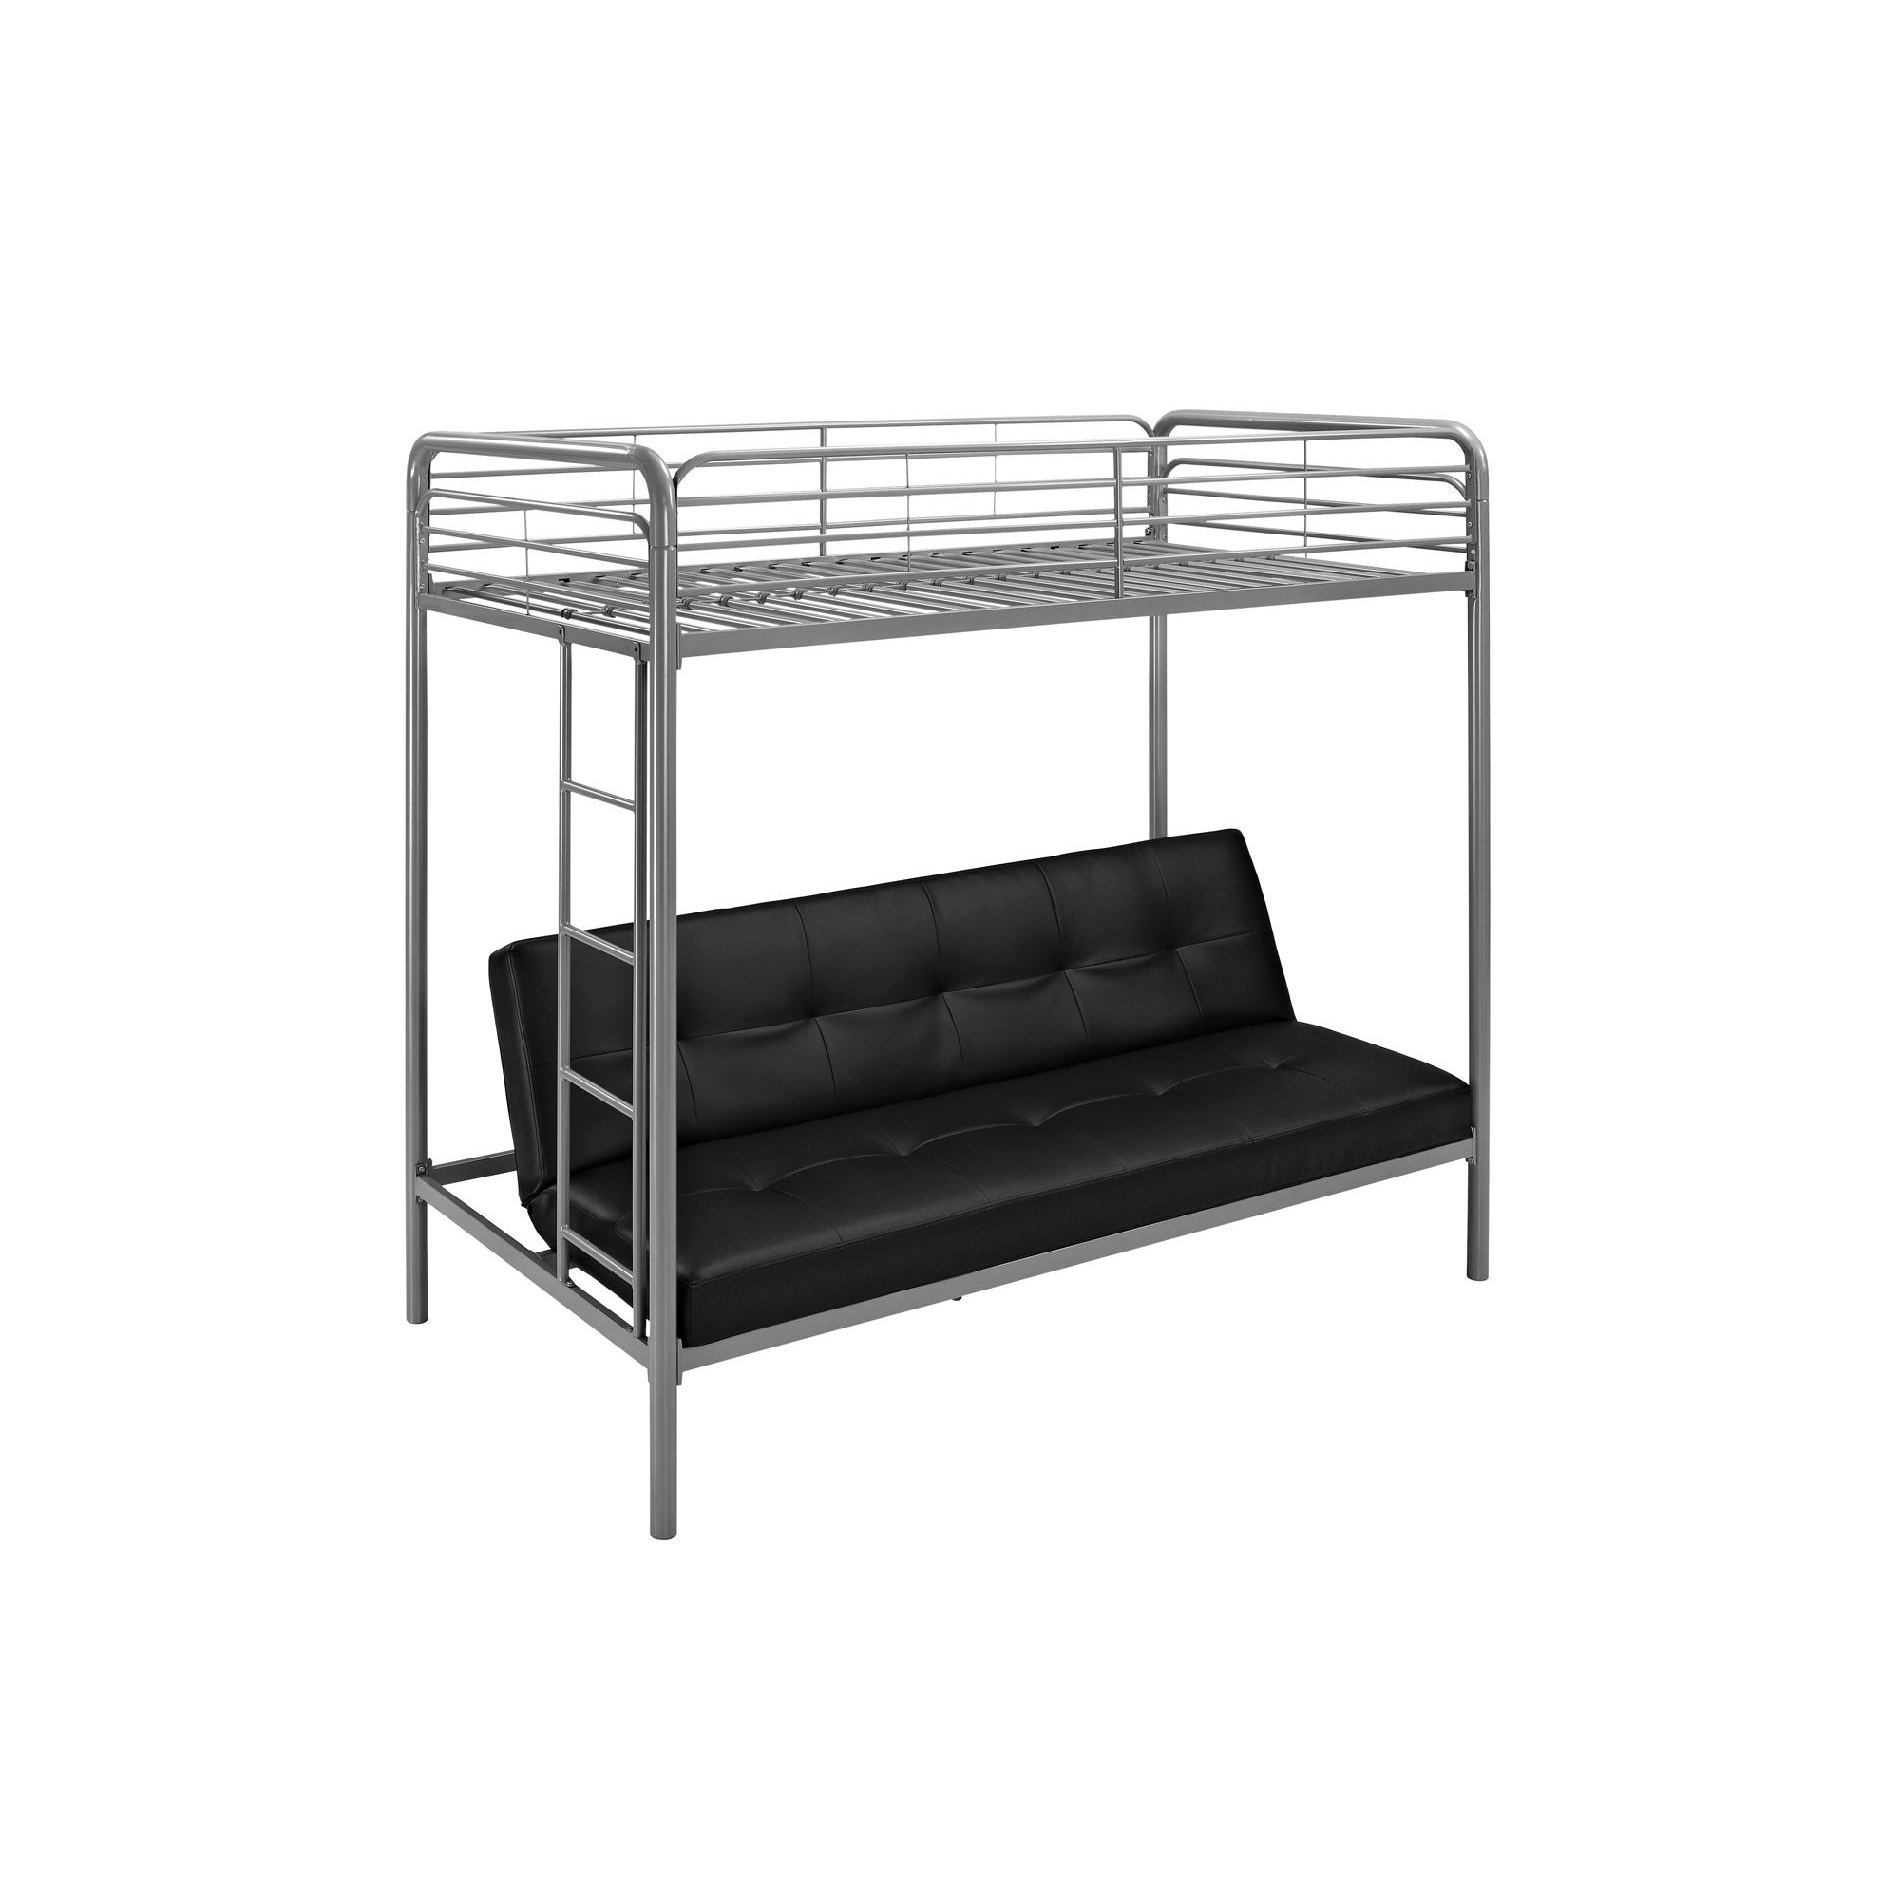 Payton Twin Over Futon Bunk Bed, Just Home Twin Futon Bunk Bed